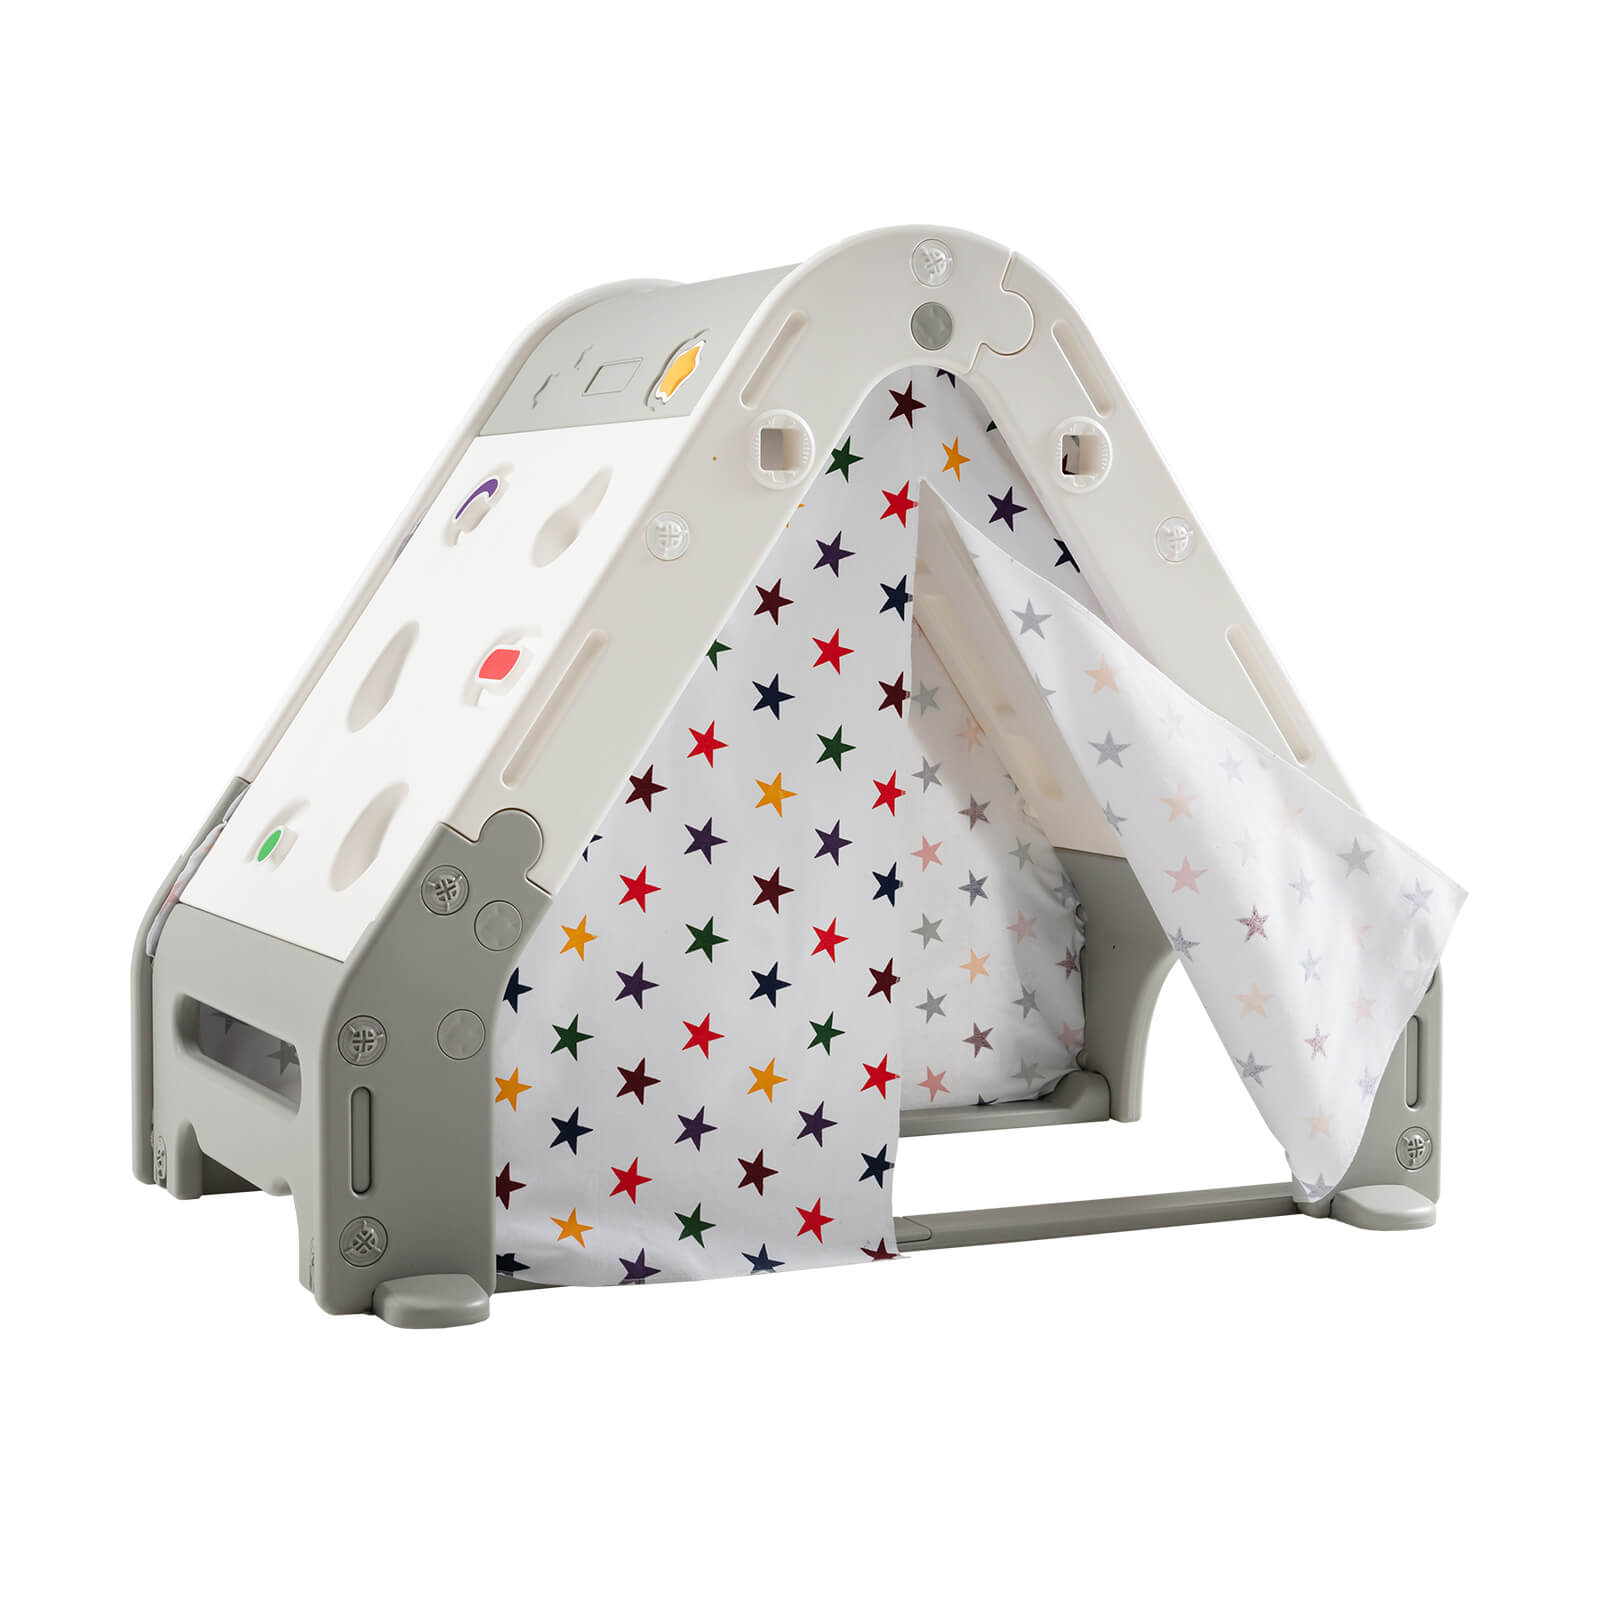 Kids Triangle Climber with Tent Cover and White Board-Grey